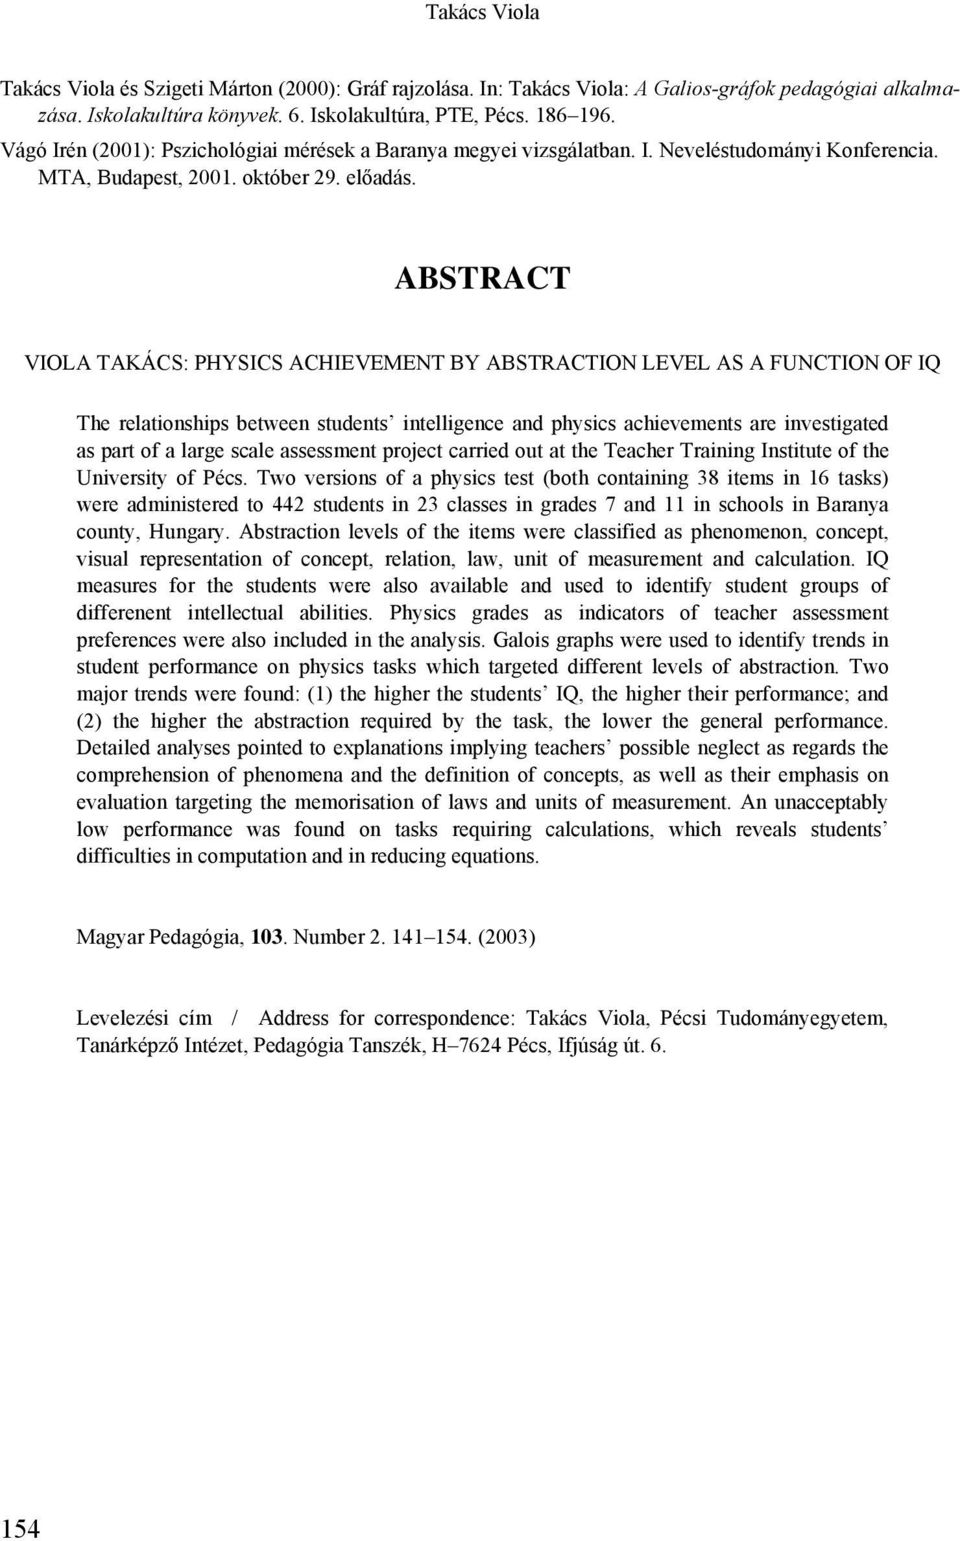 ABSTRACT VIOLA TAKÁCS: PHYSICS ACHIEVEMENT BY ABSTRACTION LEVEL AS A FUNCTION OF IQ The relationships between students intelligence and physics achievements are investigated as part of a large scale